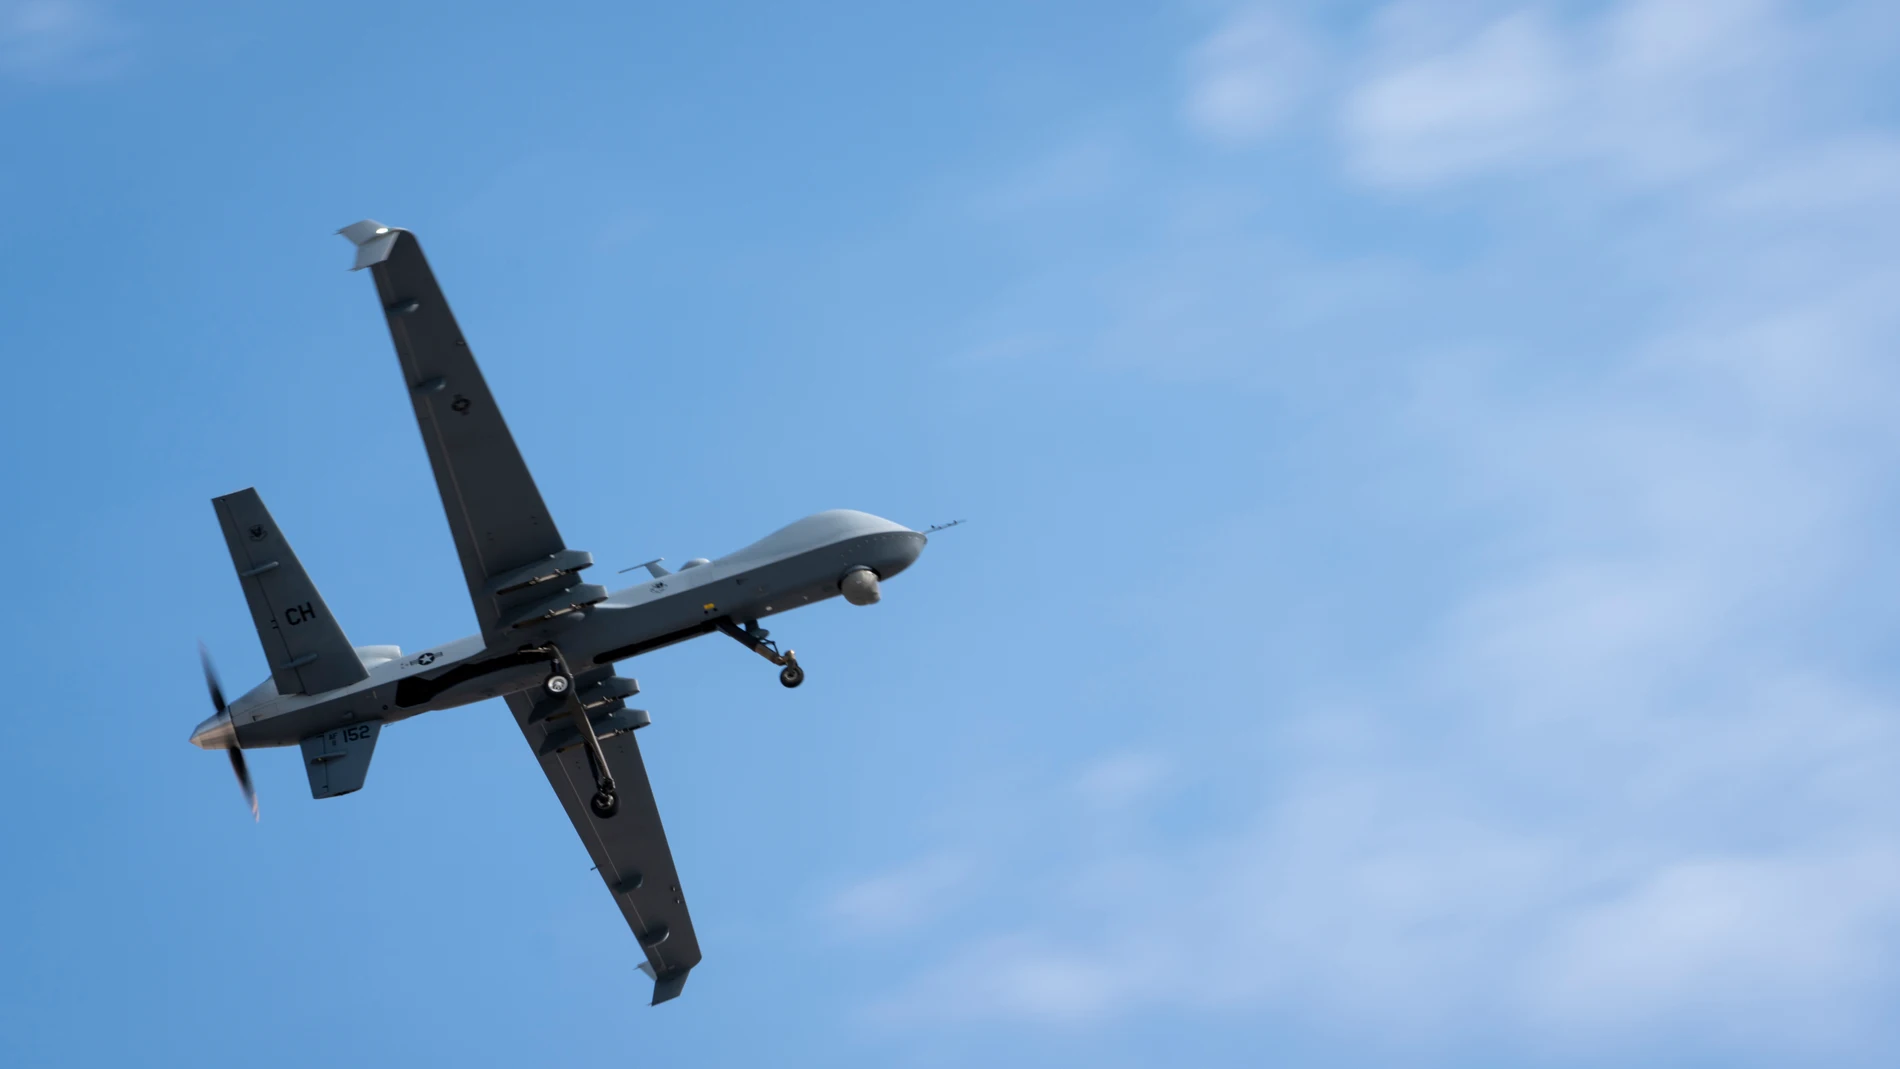 STYLELOCATIONA U.S. Air Force MQ-9 Reaper drone assigned to the 432nd Wing, takes off from the flight-line at Creech Air Force Base September 1, 2021 in Indian Springs, Nevada. (Foto de ARCHIVO)01/09/2021